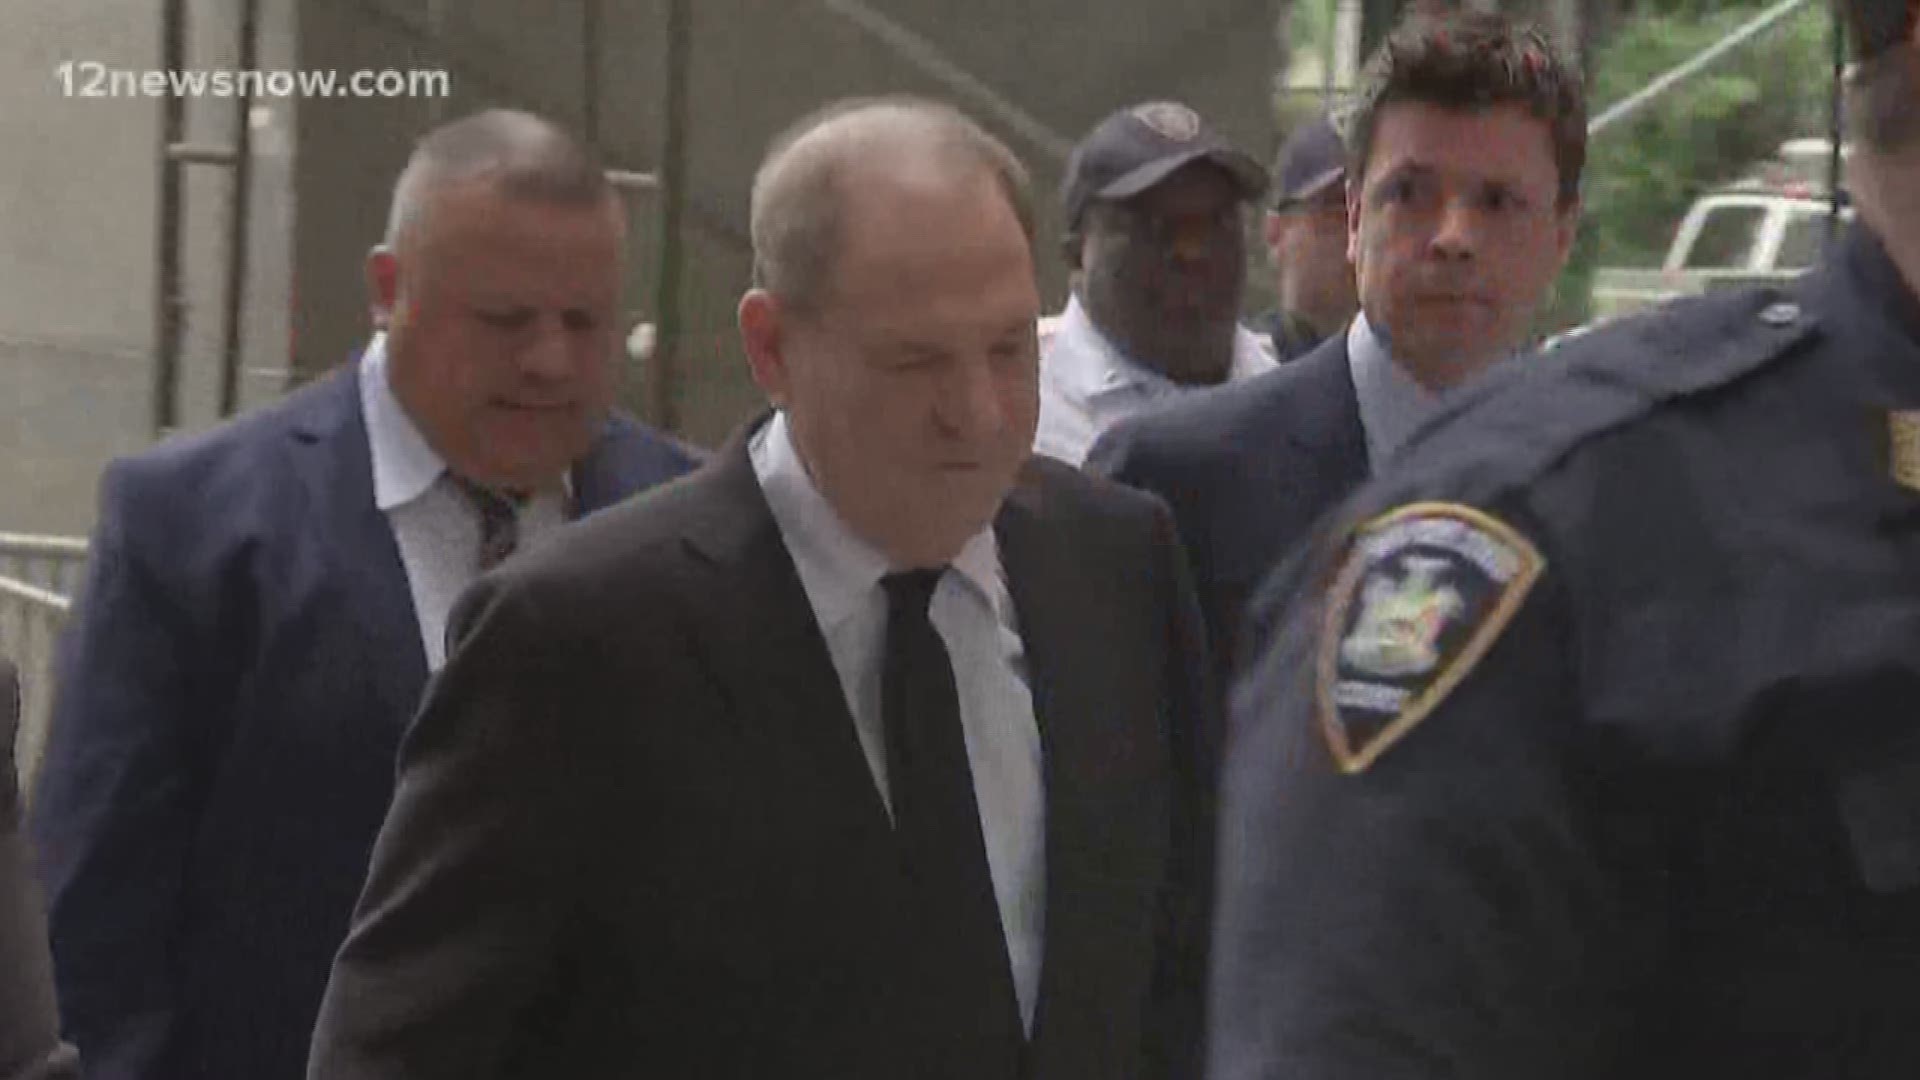 Former Hollywood producer Harvey Weinstein appeared in court this morning for new charges. He pled not guilty to predatory sexual assault, stemming from a 1993 alleged rape. His trial date was reset for January.